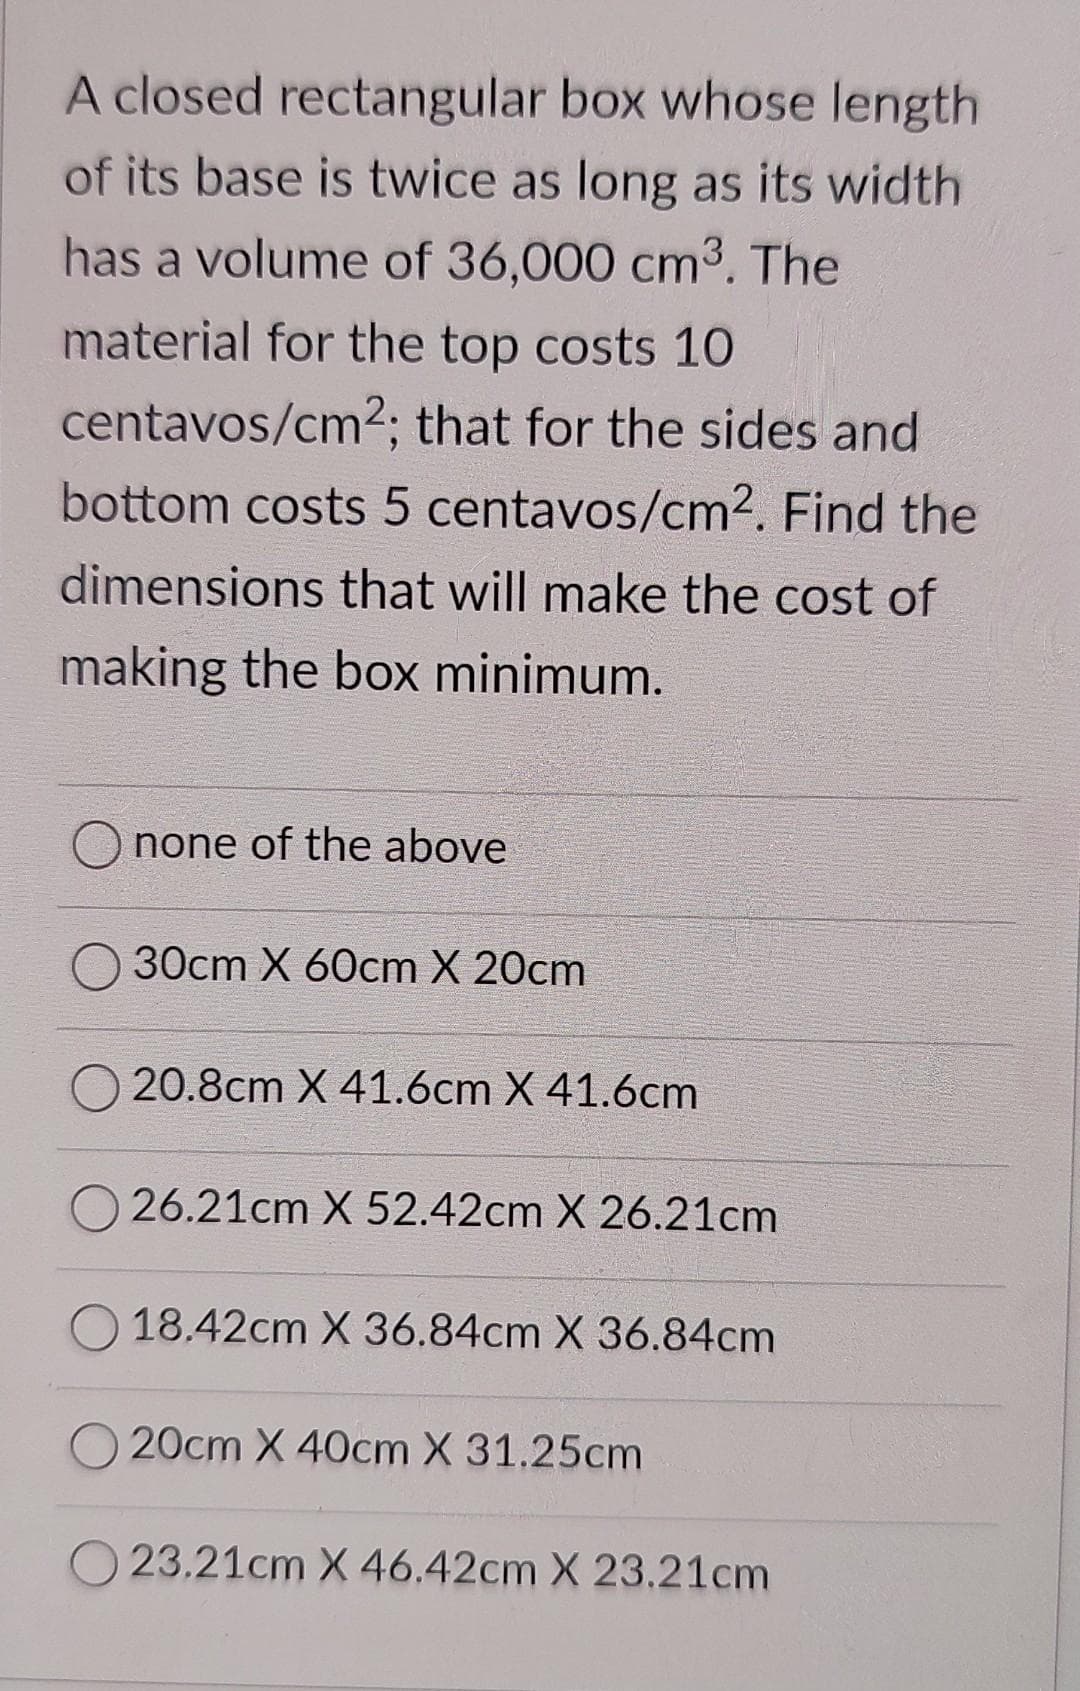 A closed rectangular box whose length
of its base is twice as long as its width
has a volume of 36,000 cm3. The
material for the top costs 10
centavos/cm2; that for the sides and
bottom costs 5 centavos/cm². Find the
dimensions that will make the cost of
making the box minimum.
none of the above
30cm X 60cm X 20cm
20.8cm X 41.6cm X 41.6cm
26.21cm X 52.42cm X 26.21cm
18.42cm X 36.84cm X 36.84cm
20cm X 40cm X 31.25cm
23.21cm X 46.42cm X 23.21cm
